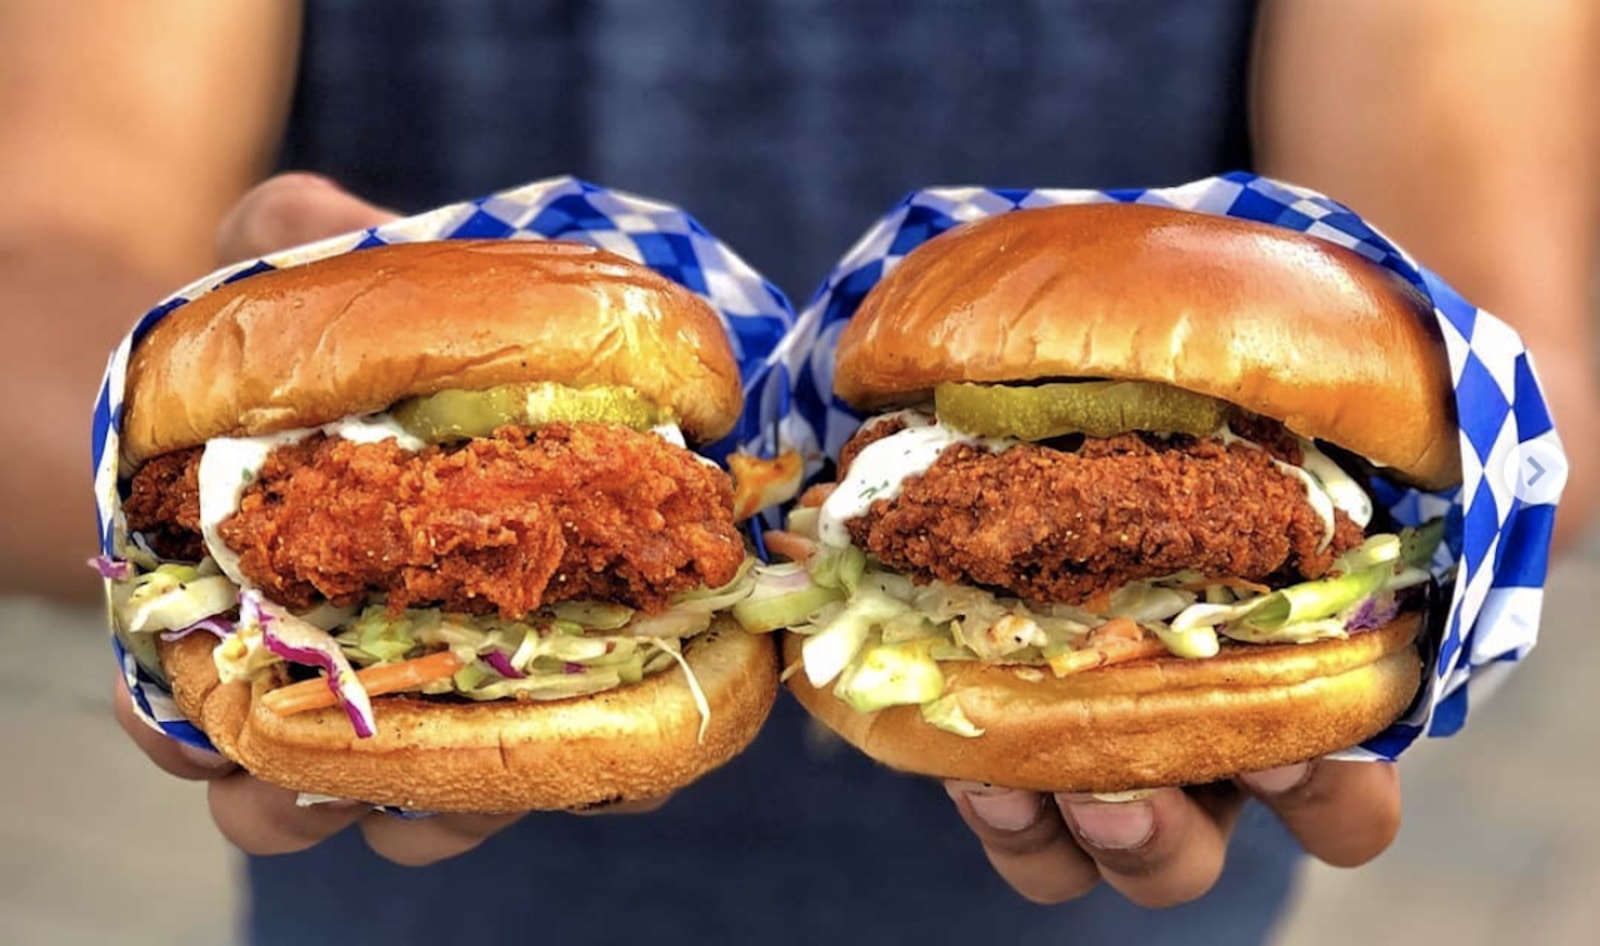 22 Vegan Fried Chicken Sandwiches That Are Better Than Chick-fil-A and Popeyes